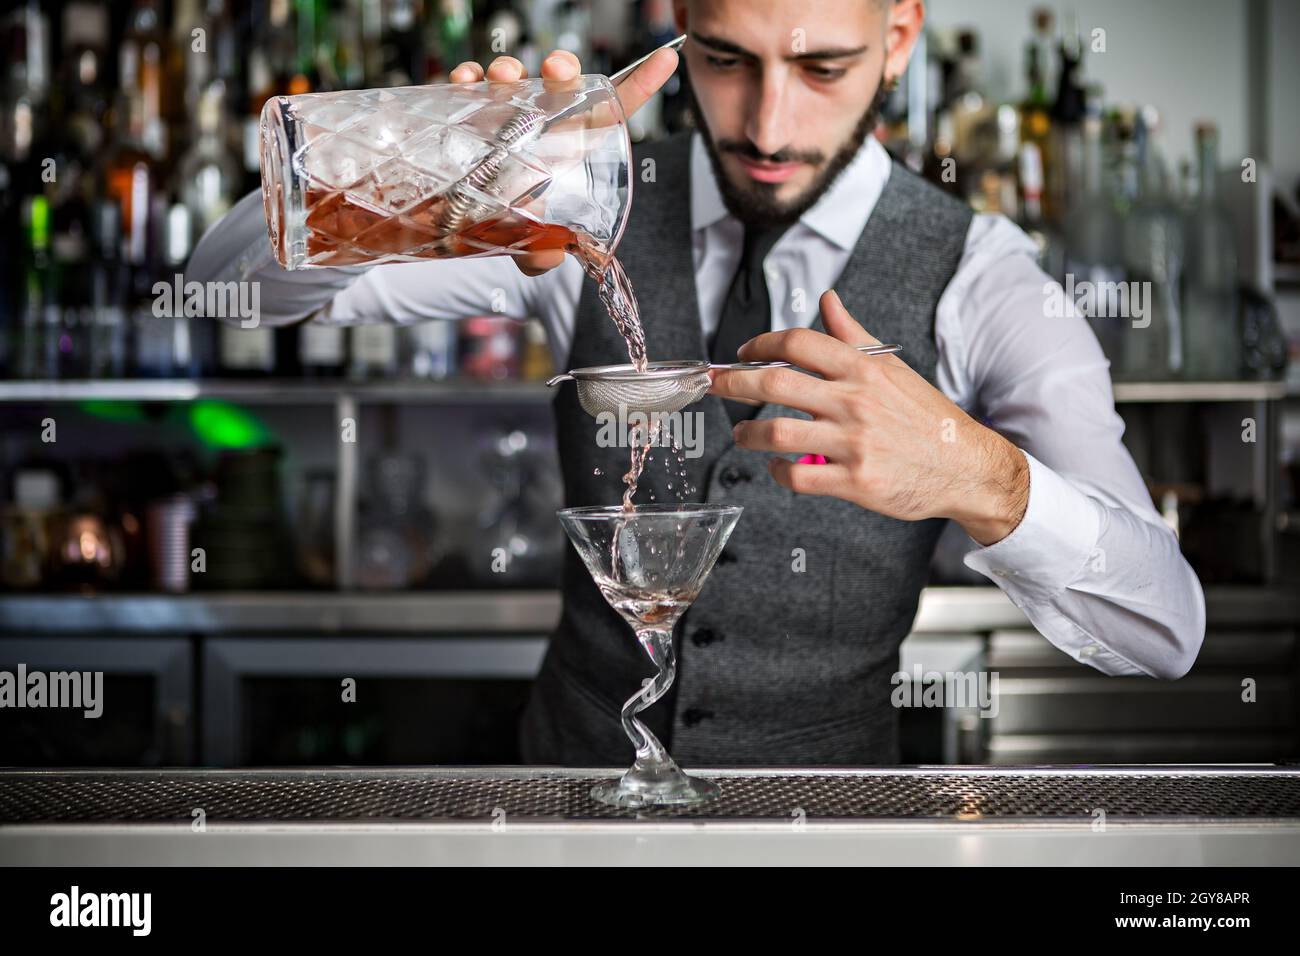 Elegant male barkeeper pouring alcohol drink through sieve into glass while preparing beverage at bar counter Stock Photo